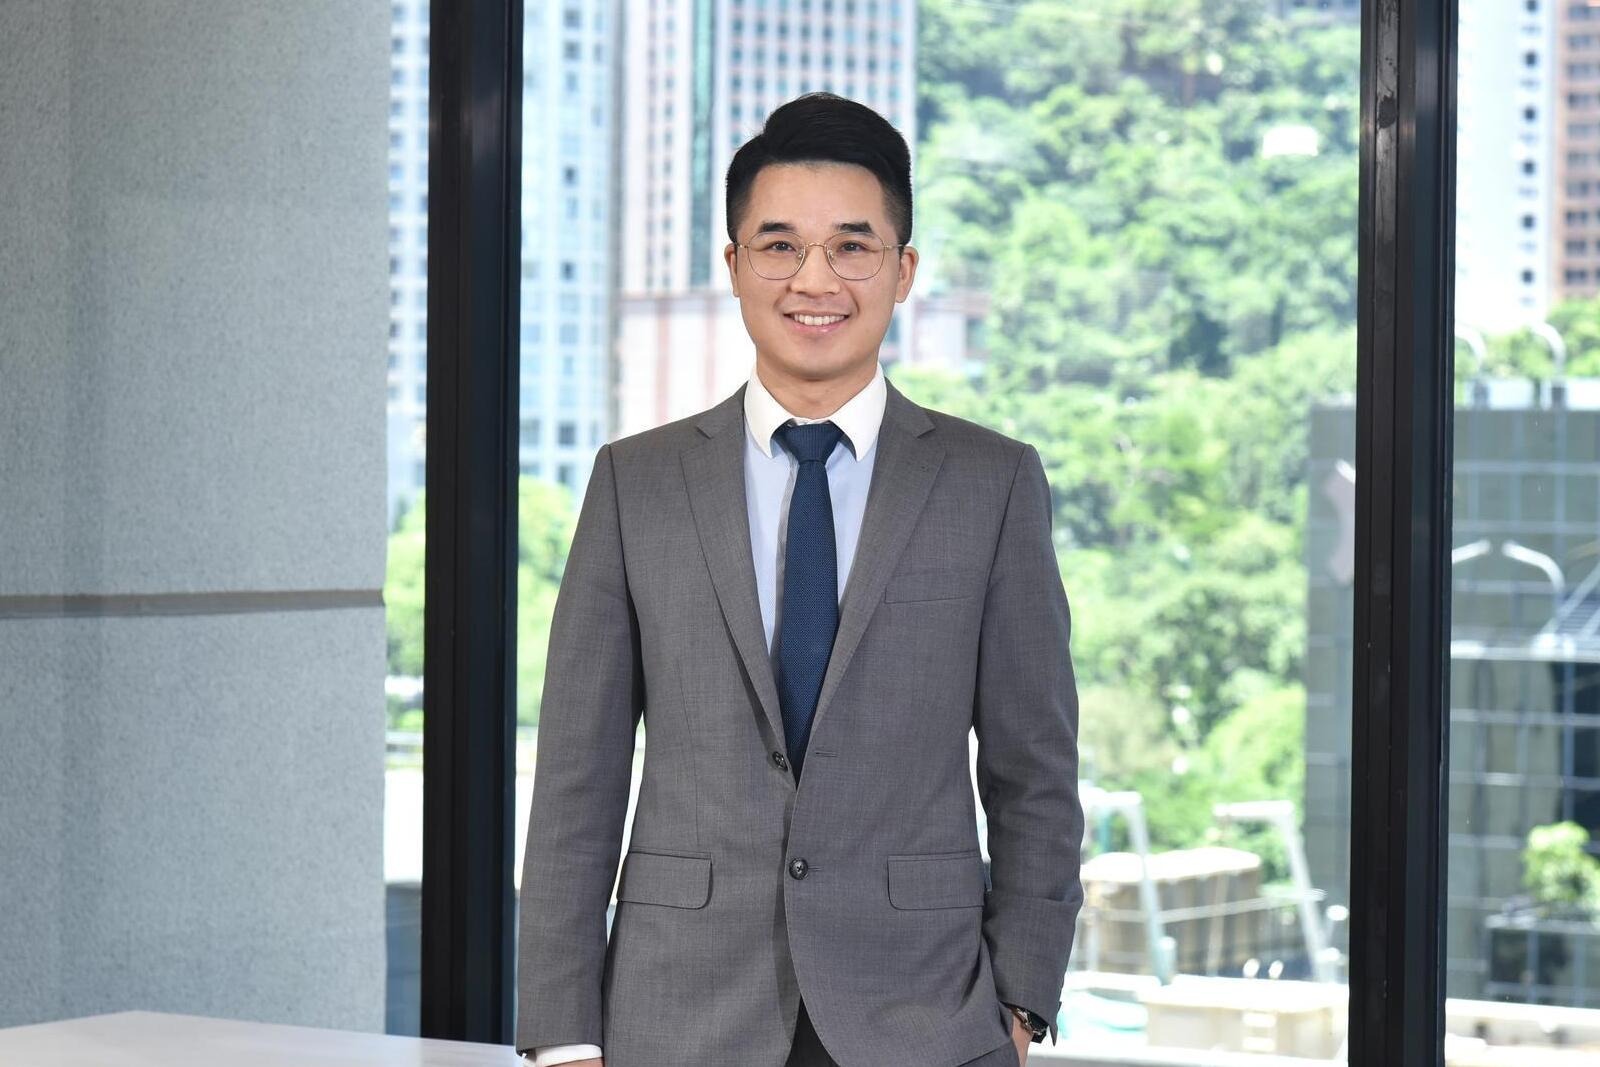 Hong Kong-based US private client tax specialist promoted to partner at Squire Patton Boggs